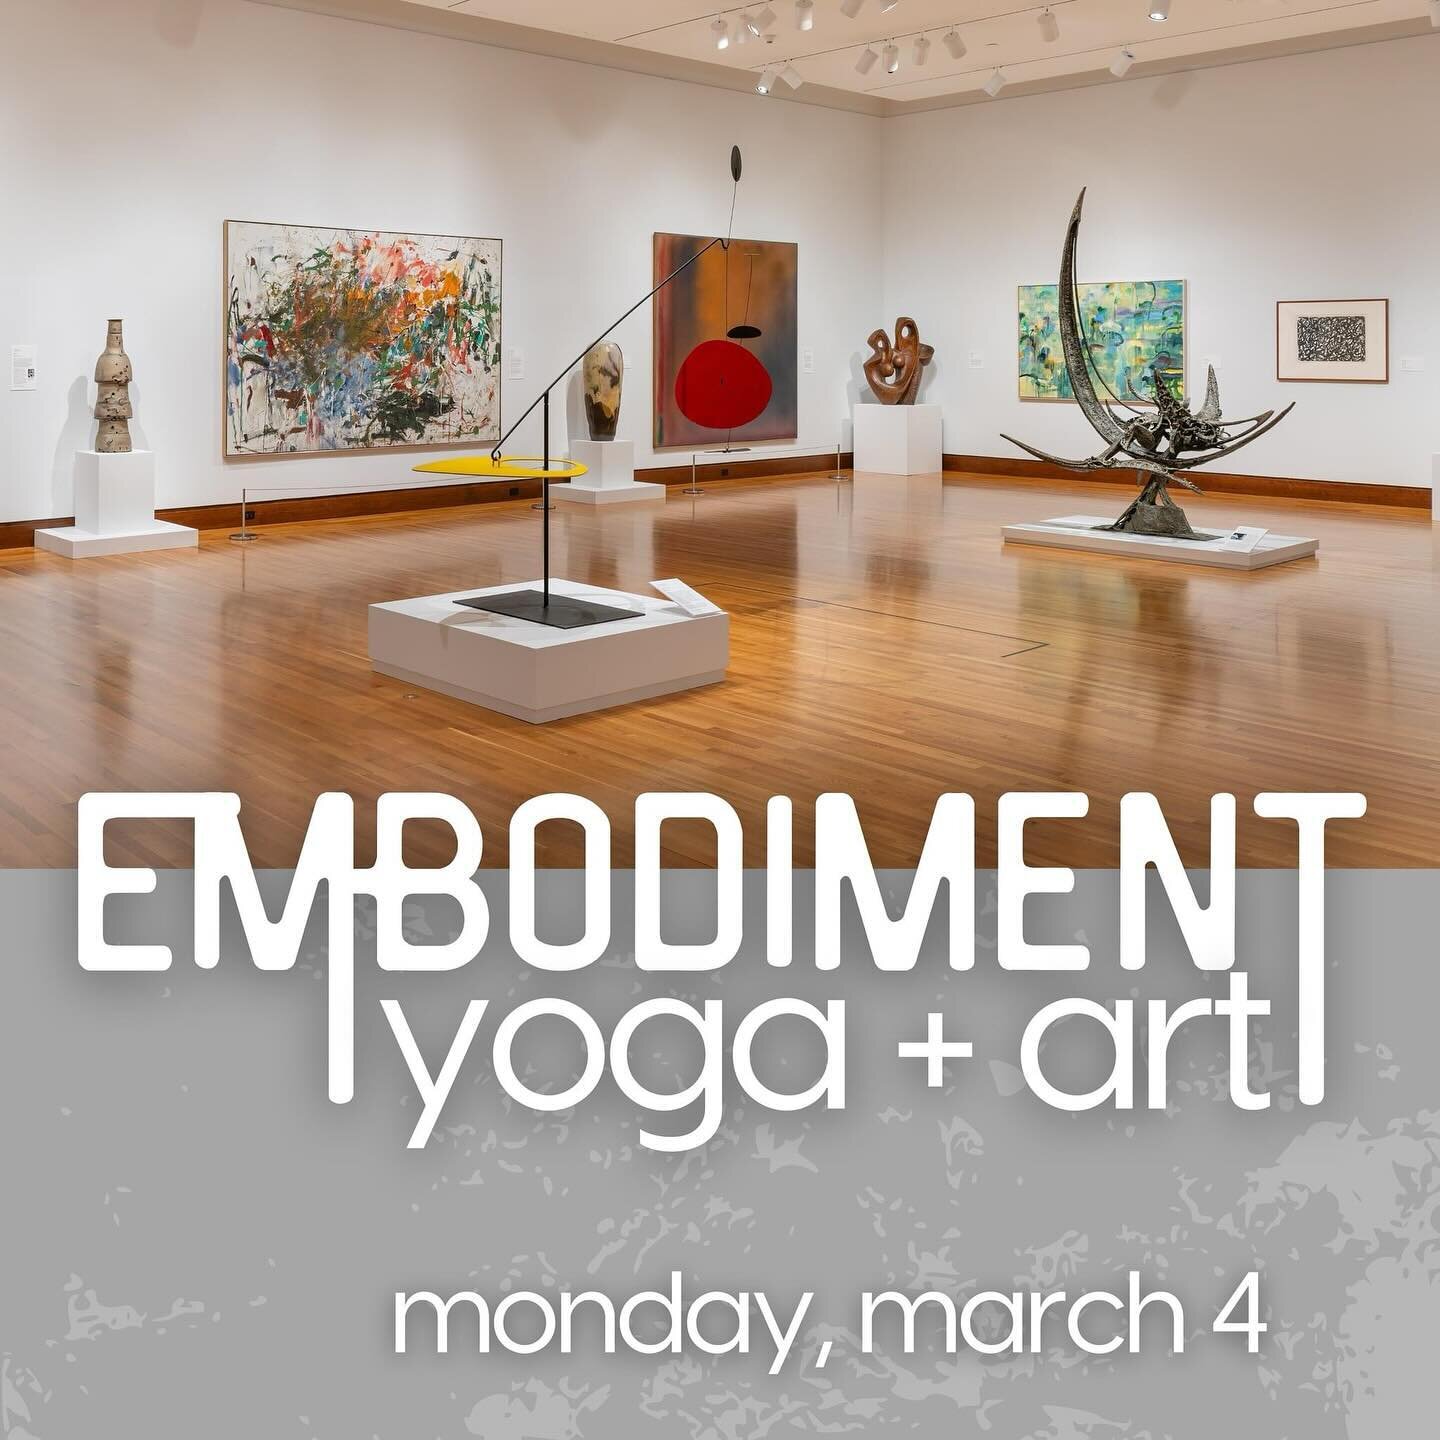 Join us Monday, March 4 at the Currier Museum for &ldquo;Breathing Color,&rdquo; the second installment in the new series of one-day retreats entitled &ldquo;Embodiment: Yoga + Art.&rdquo; 

These unique retreats are inspired by and held within the C